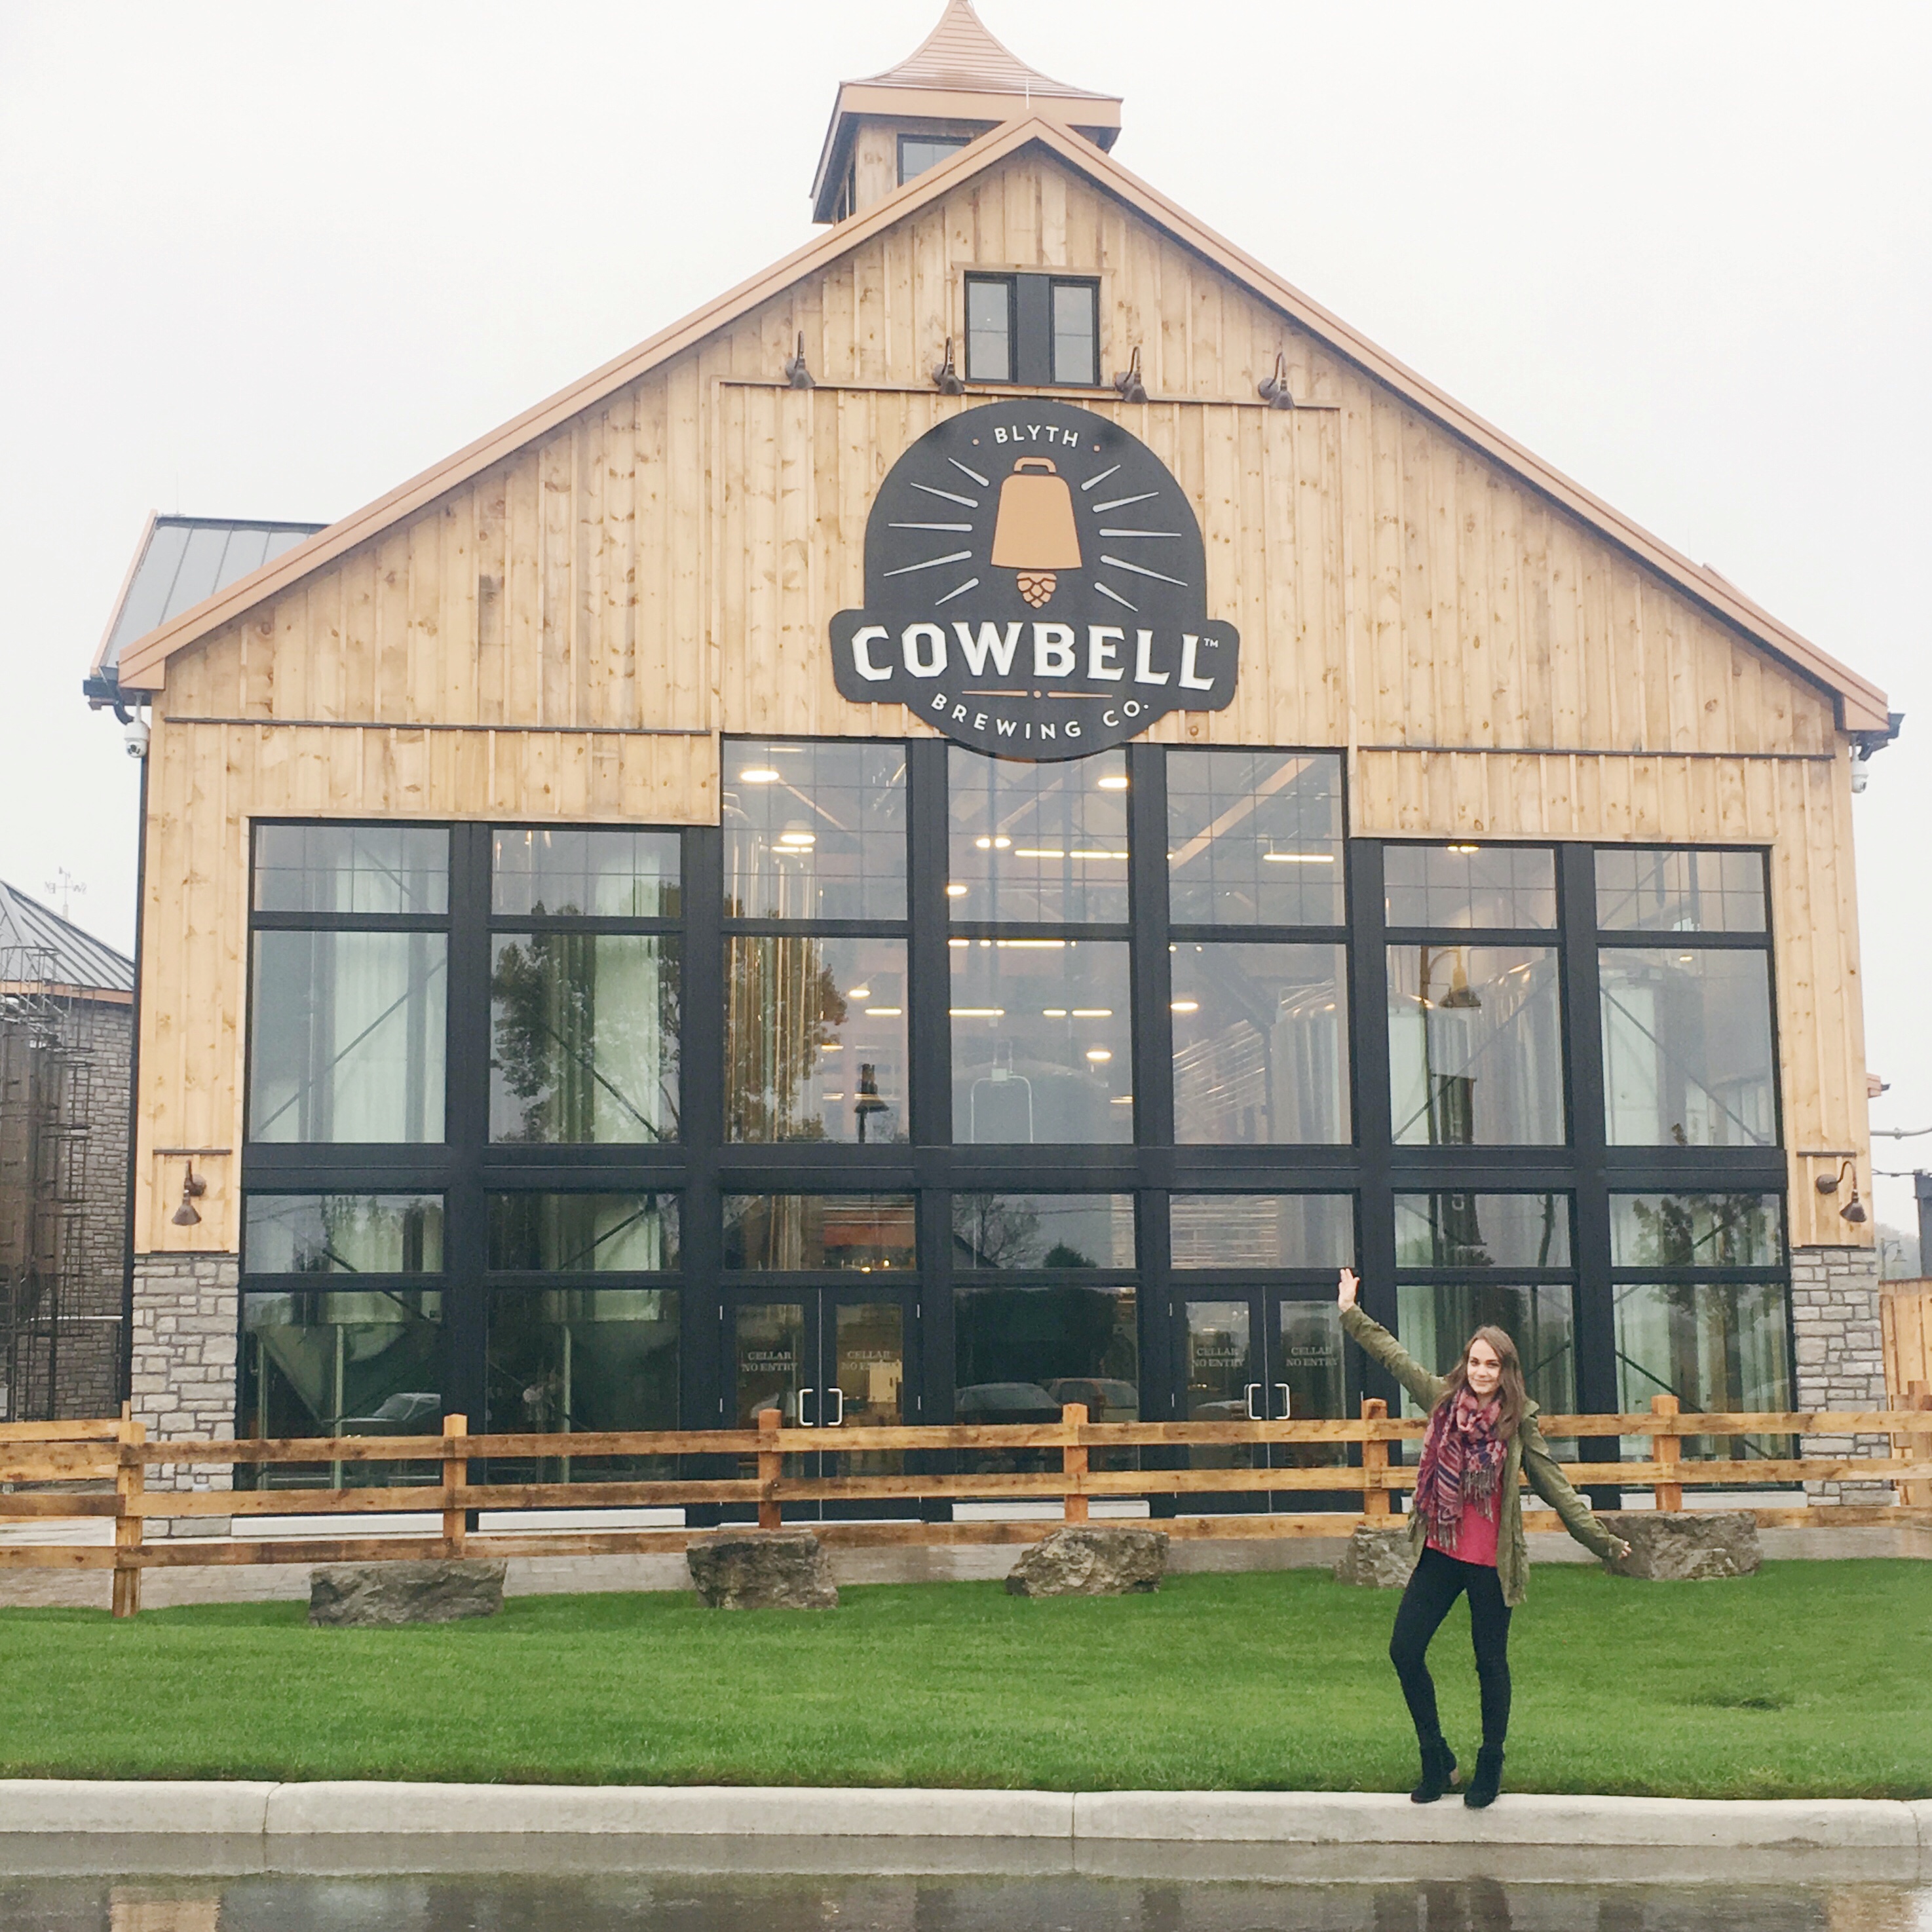 Cowbell Brewery